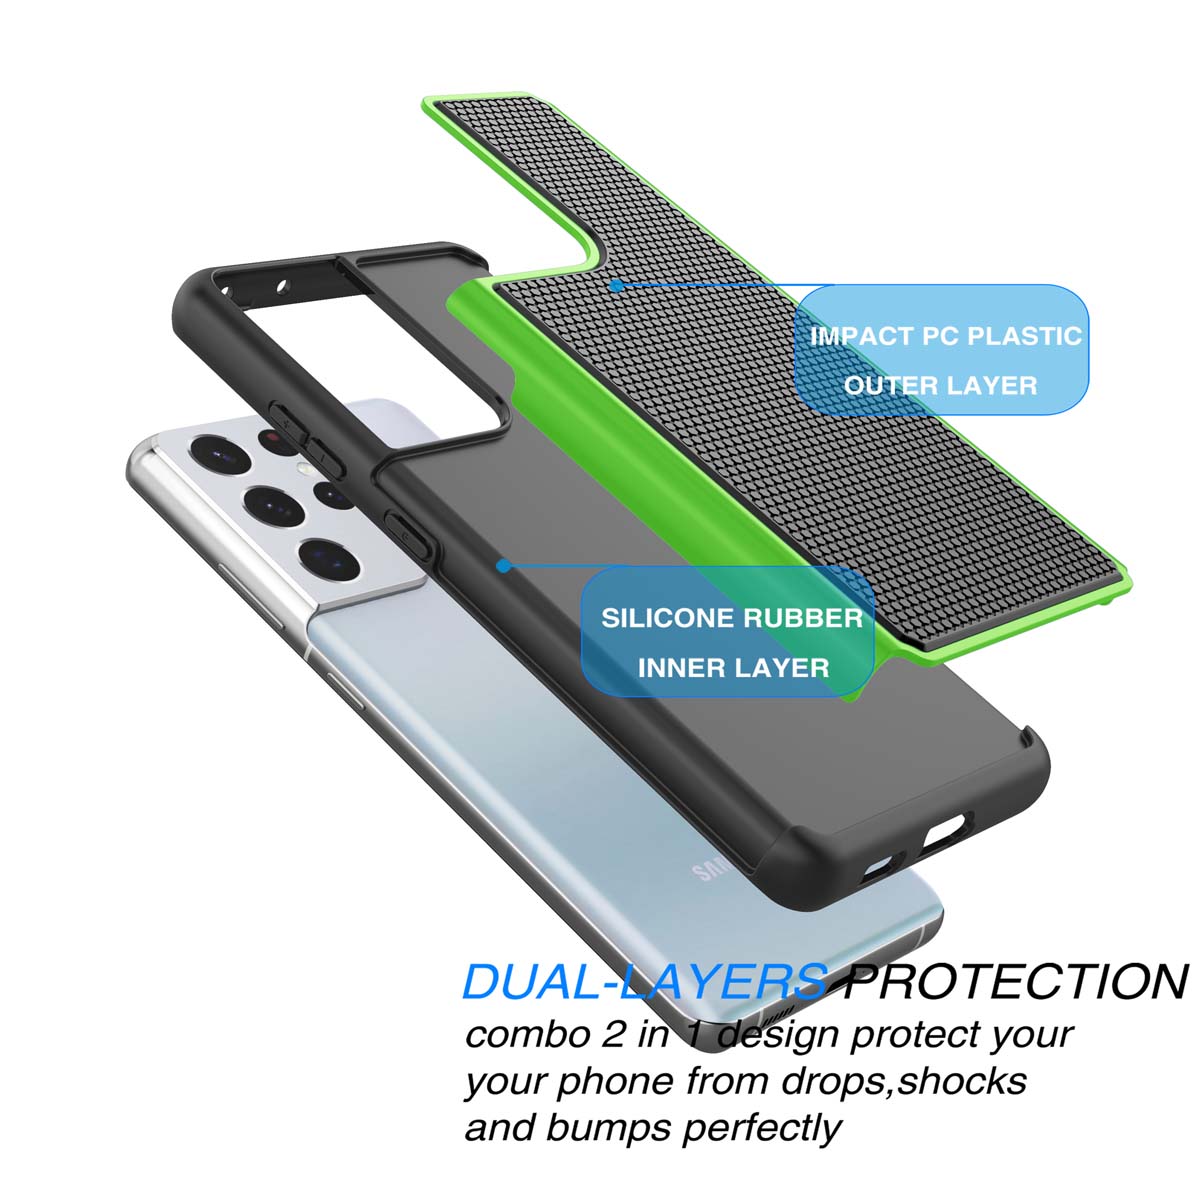 Galaxy S21 Ultra Case, Cover Case for Galaxy S21 Ultra 6.8", Njjex Shock Absorbing Dual Layer Silicone & Plastic Bumper Rugged Grip Hard Protective Cases Cover for Samsung Galaxy S21 Ultra 5G 2020 - image 5 of 9